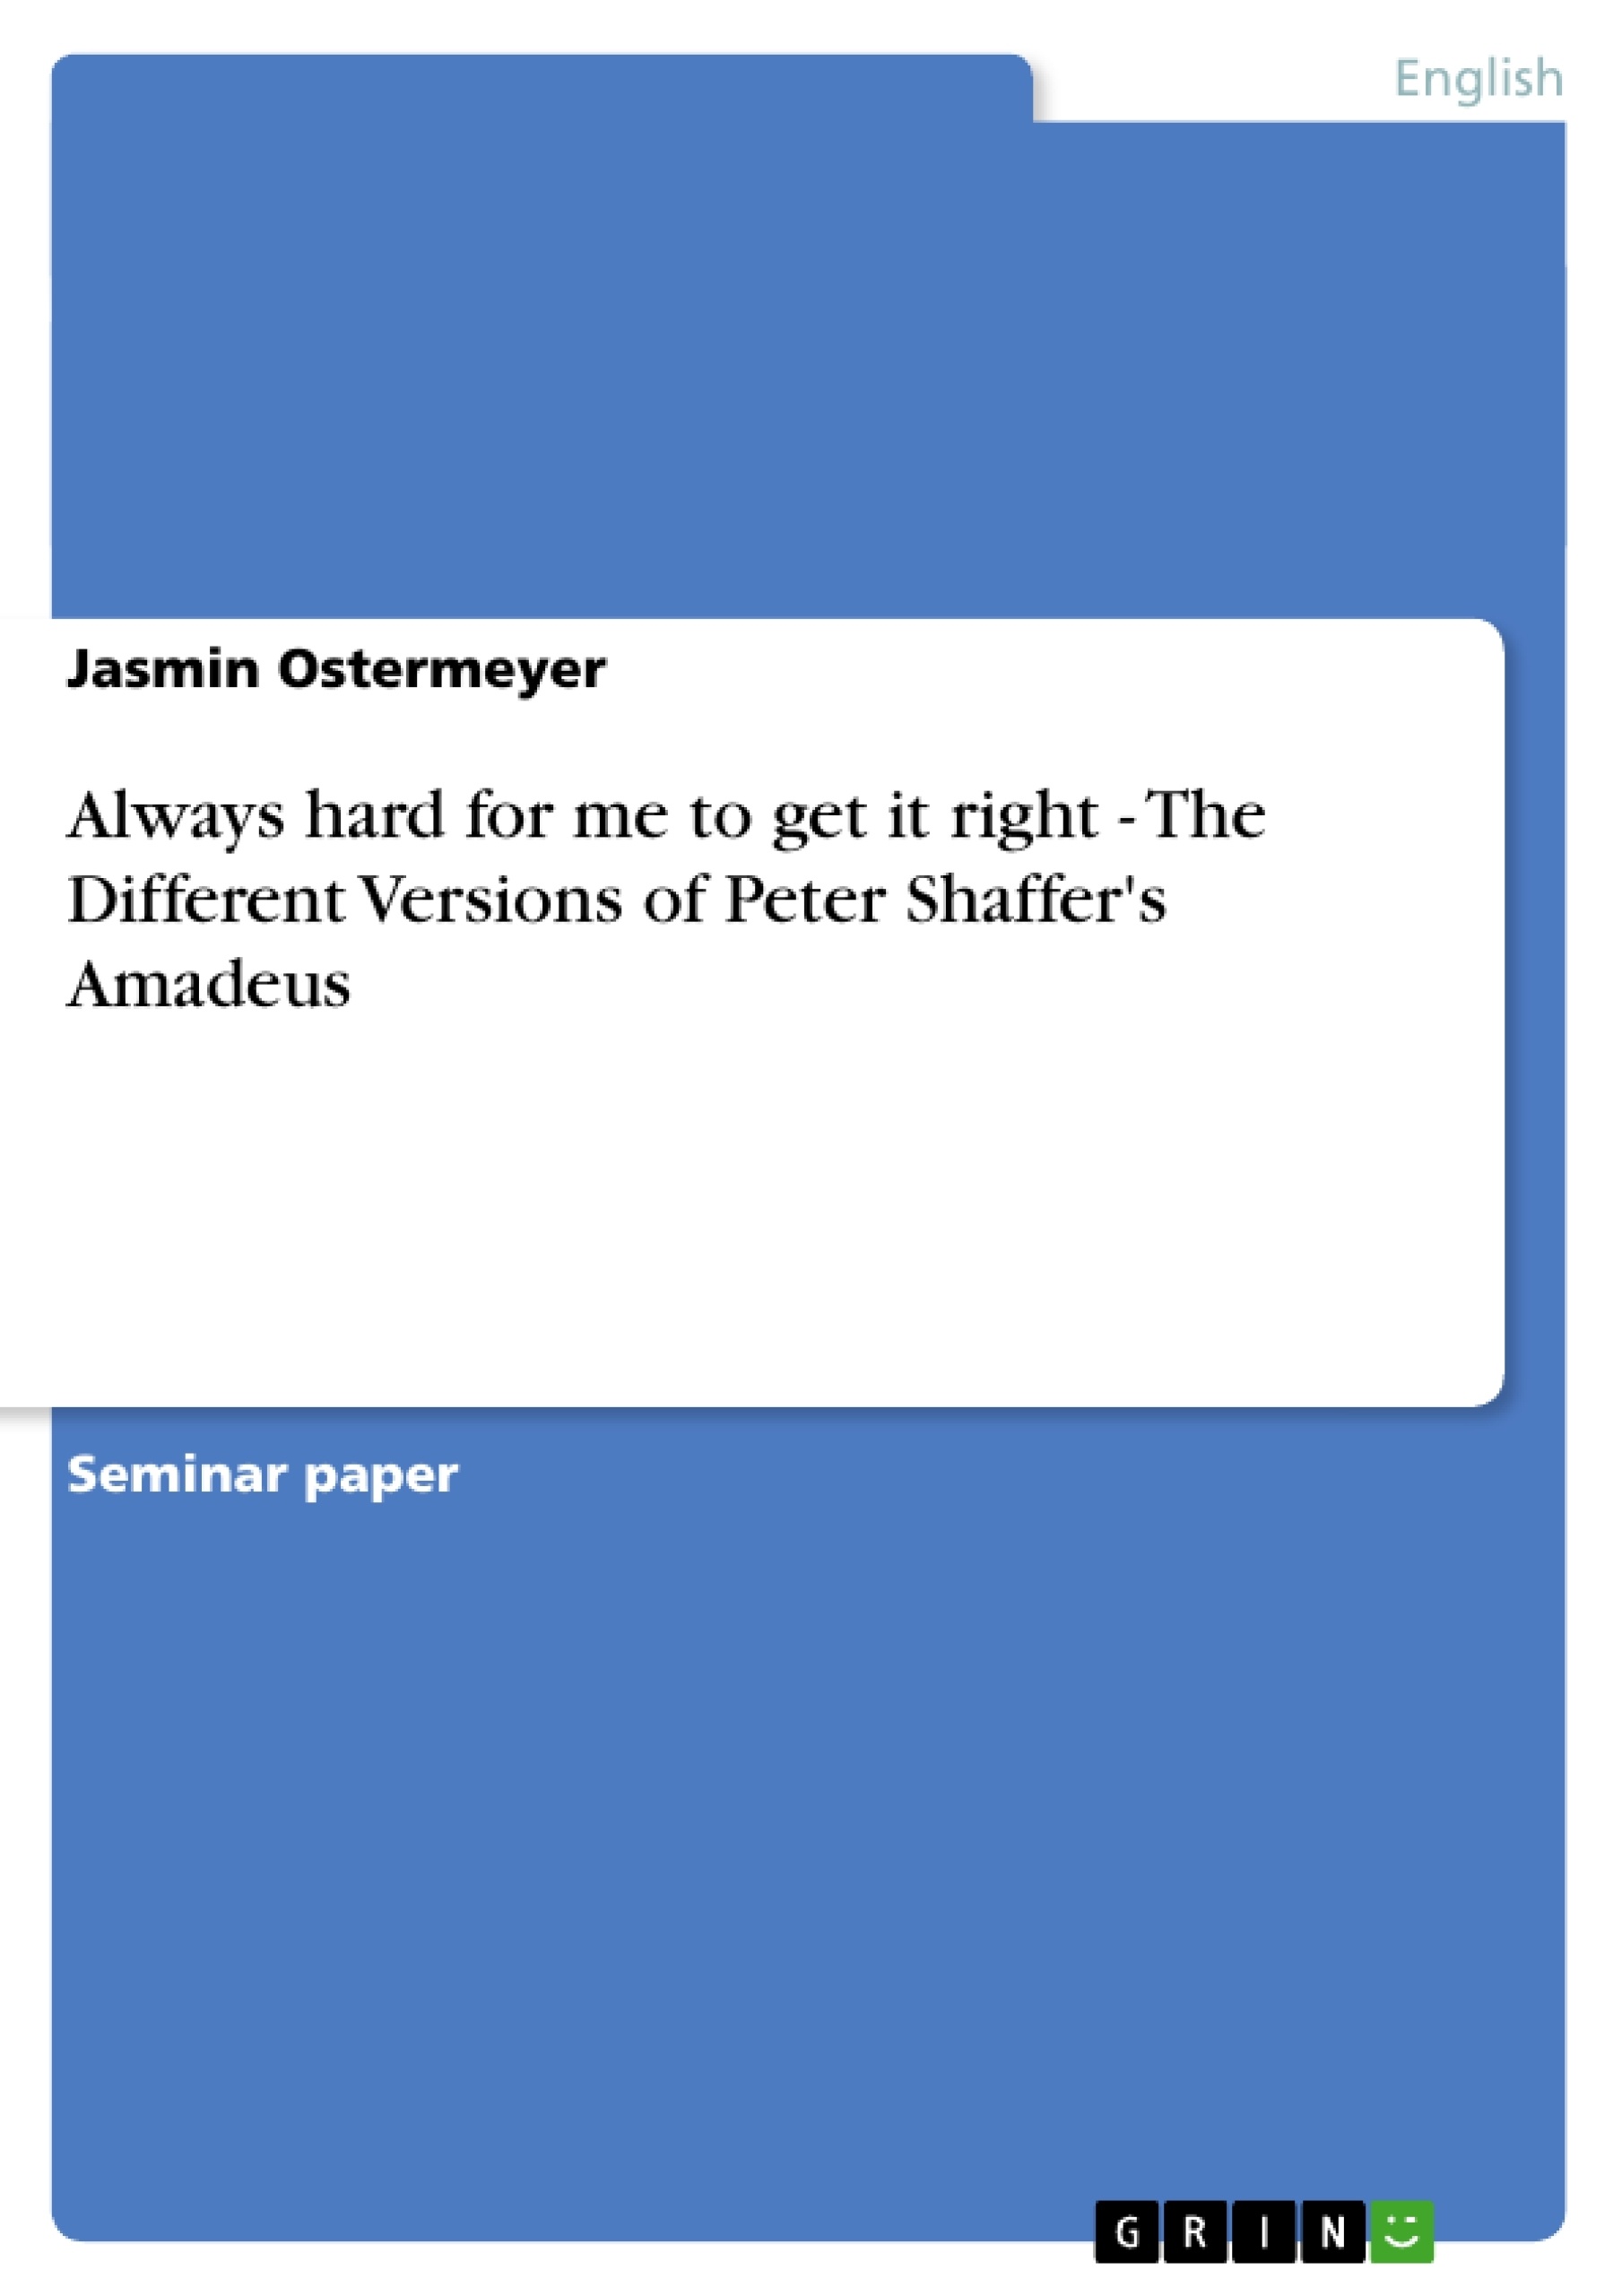 Título: Always hard for me to get it right - The Different Versions of Peter Shaffer's Amadeus